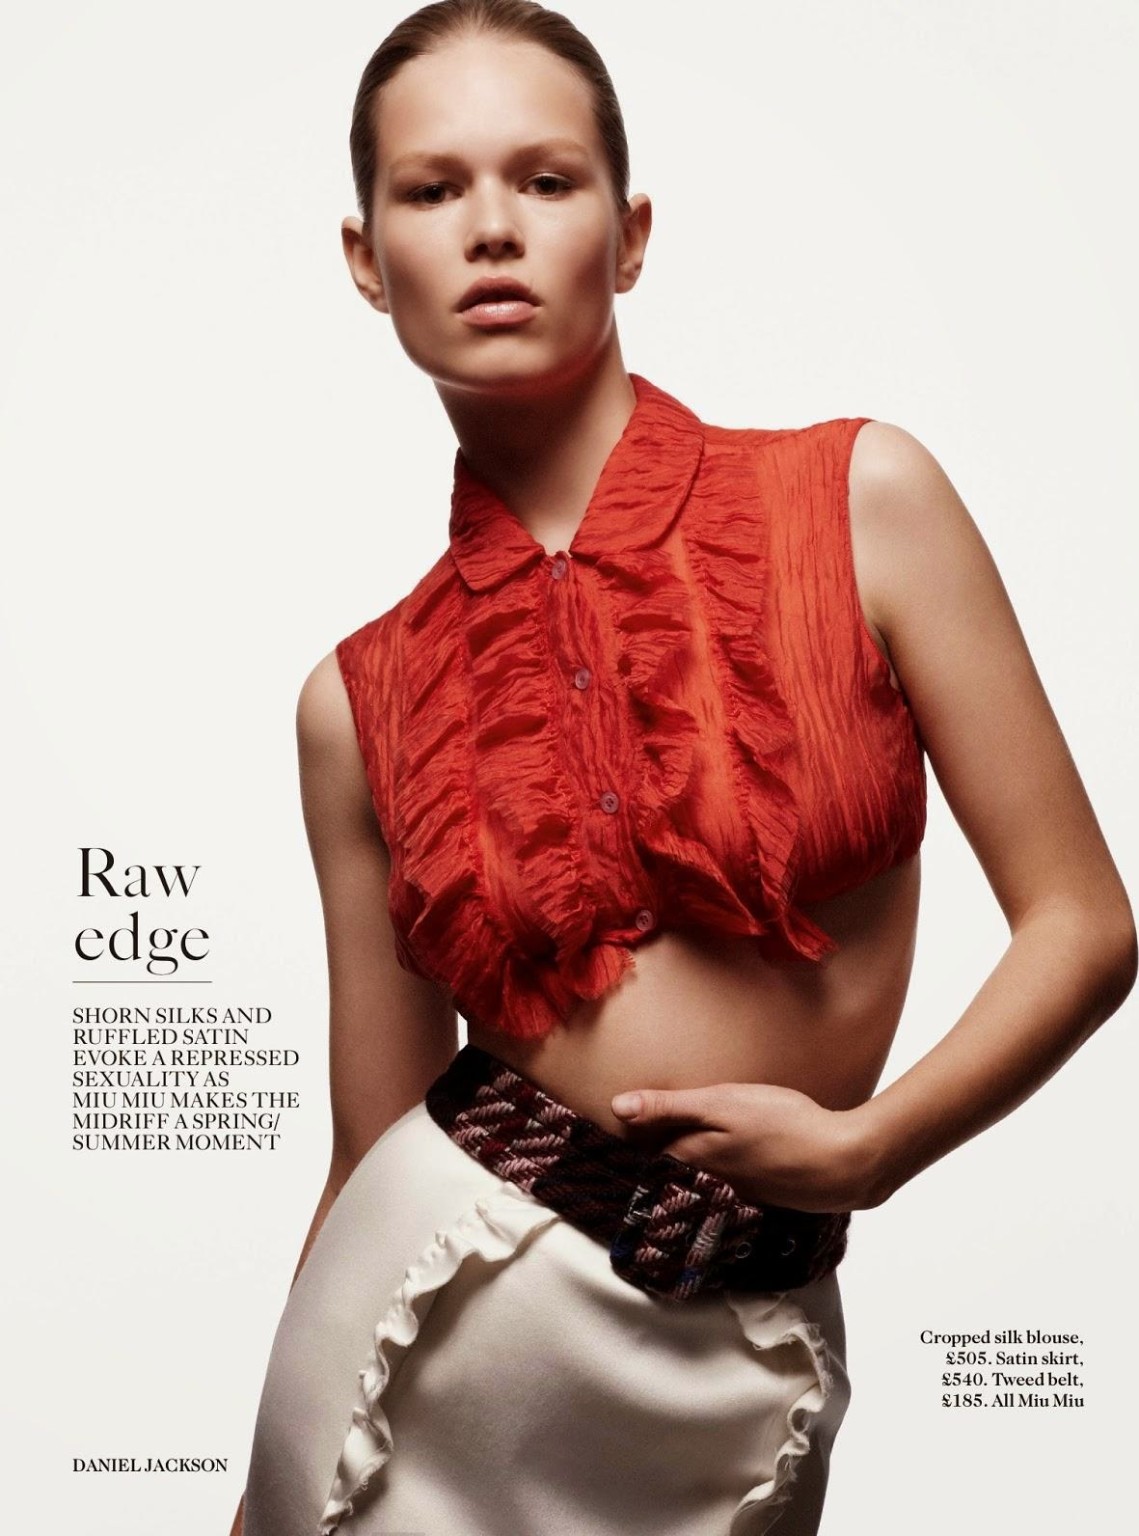 Anna Ewers looking very hot in February 2015 issue of Vogue UK #75175863